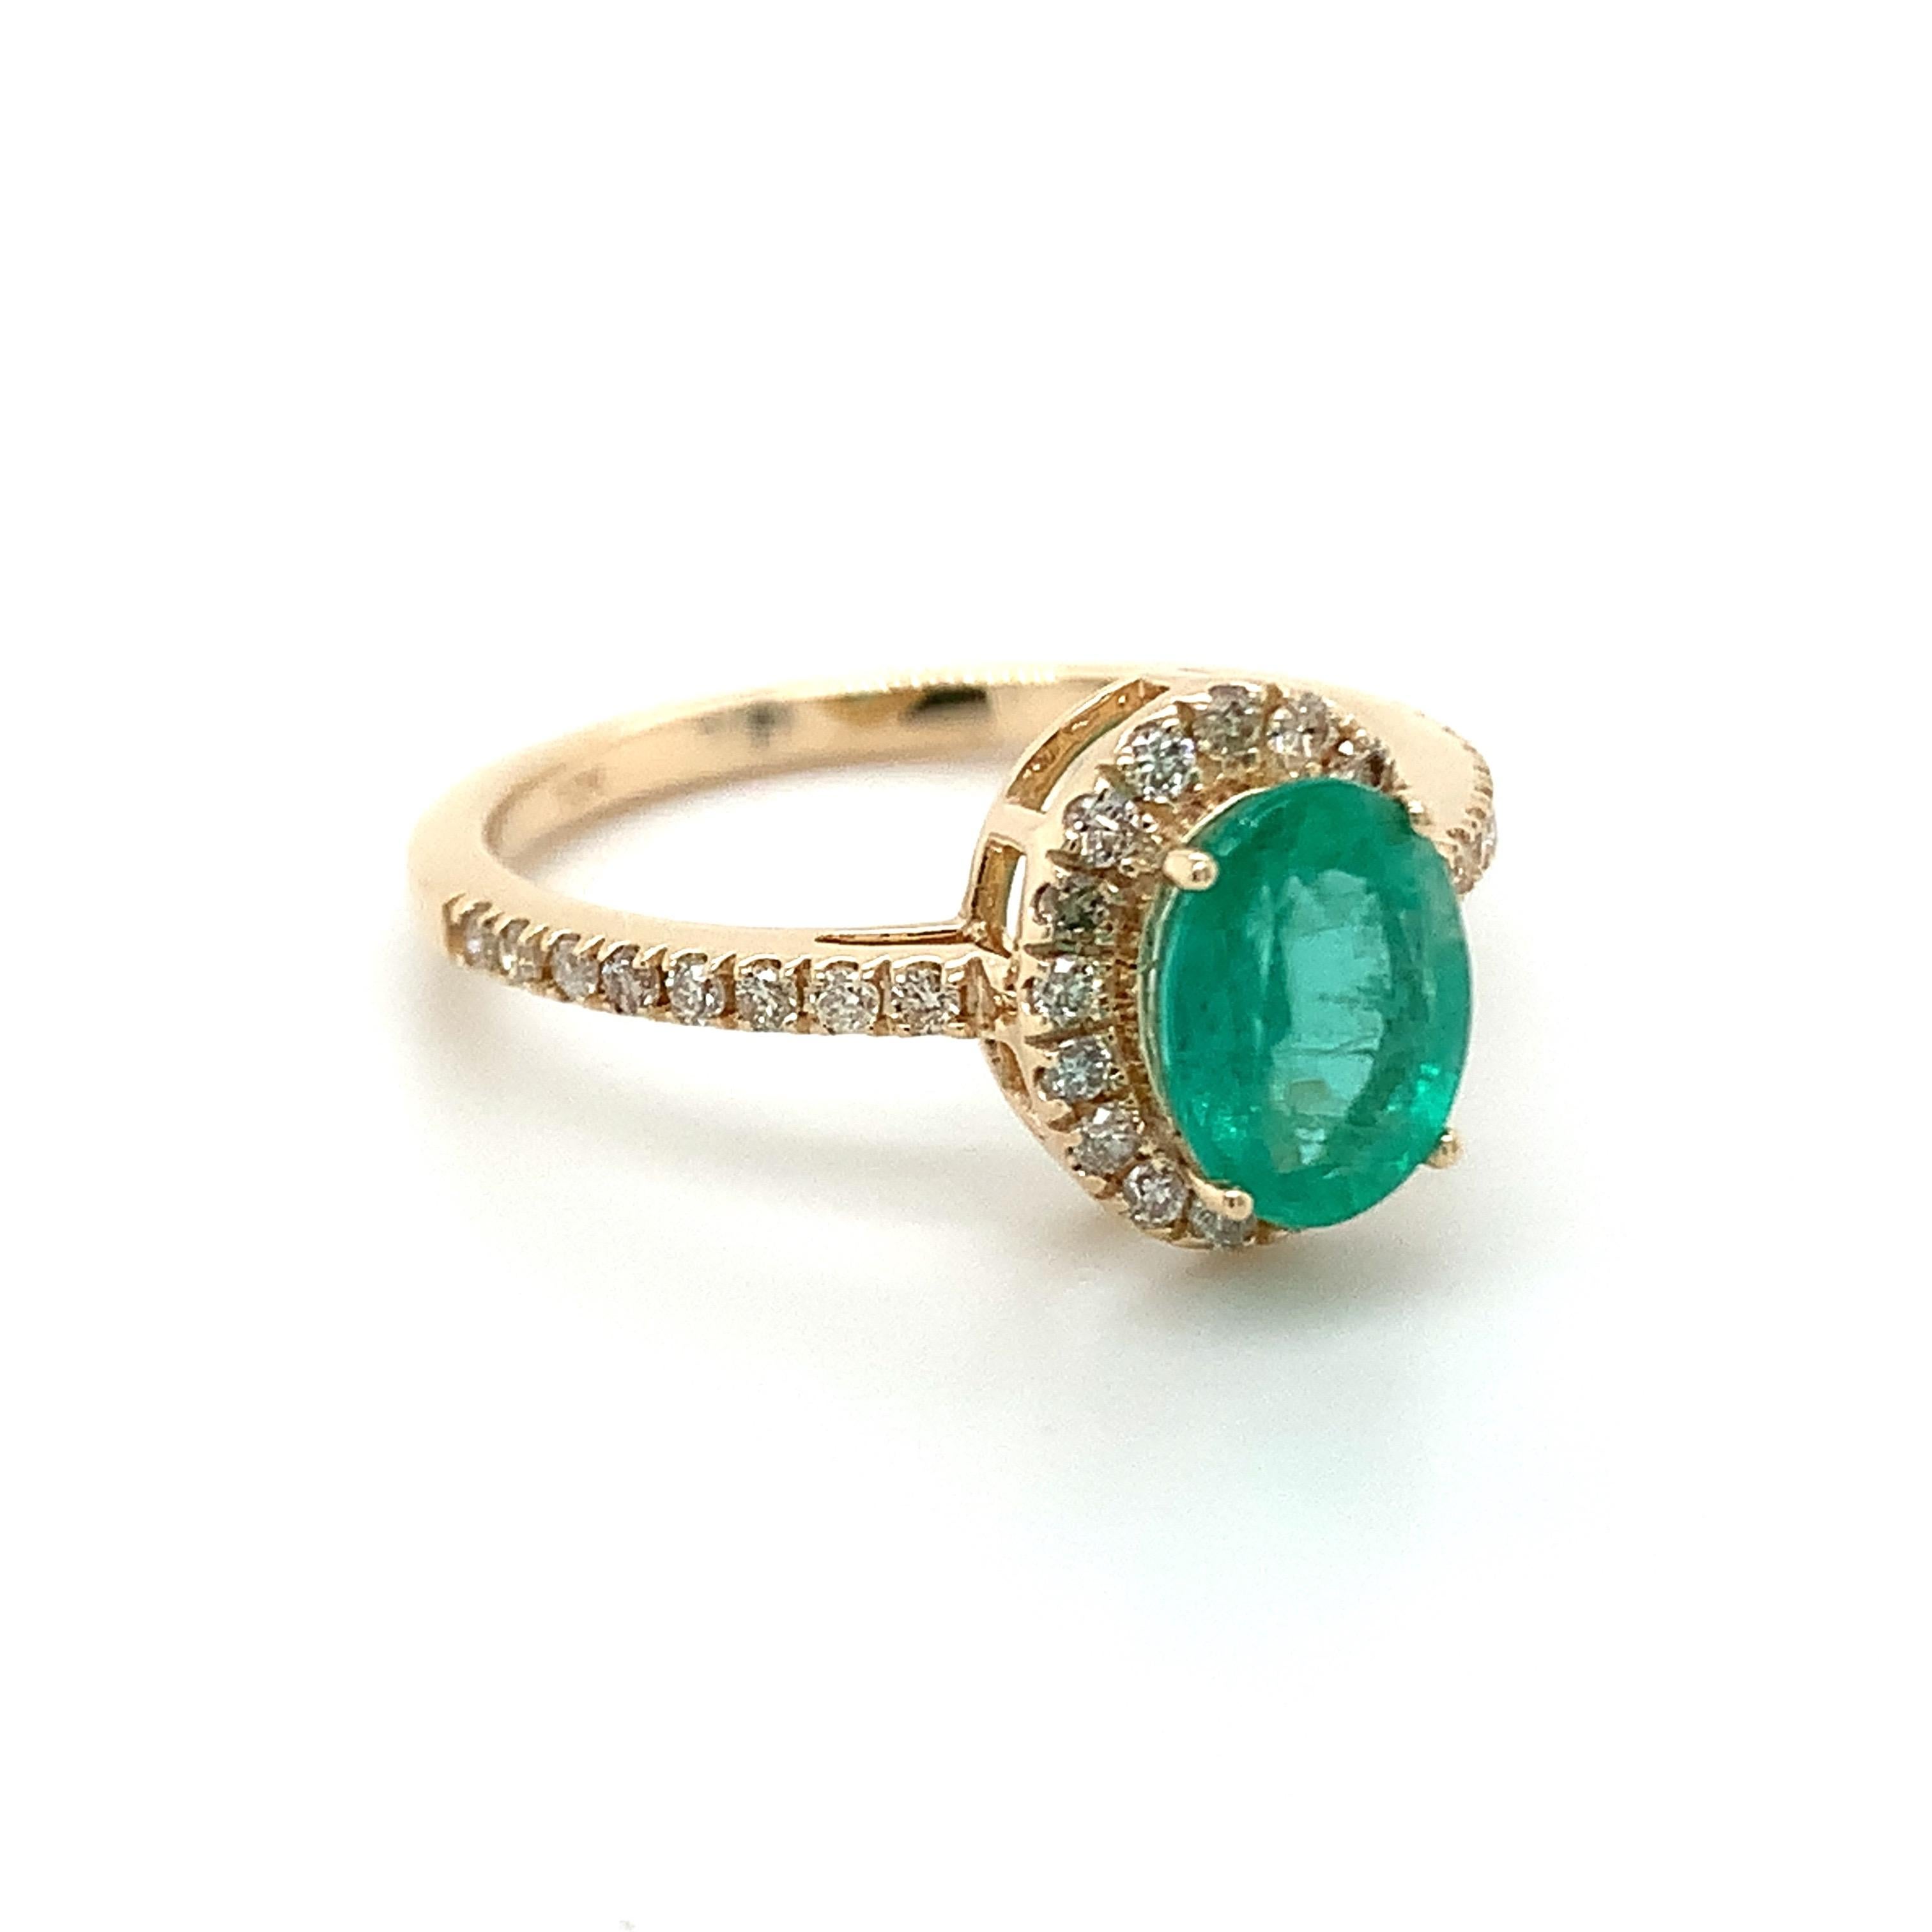 Oval cut Emerald gemstone beautifully crafted in a 10K yellow gold ring with natural diamonds.

With a vibrant green color hue. The birthstone for May is a symbol of renewed spring growth. Explore a vast range of precious stone Jewelry in our store.